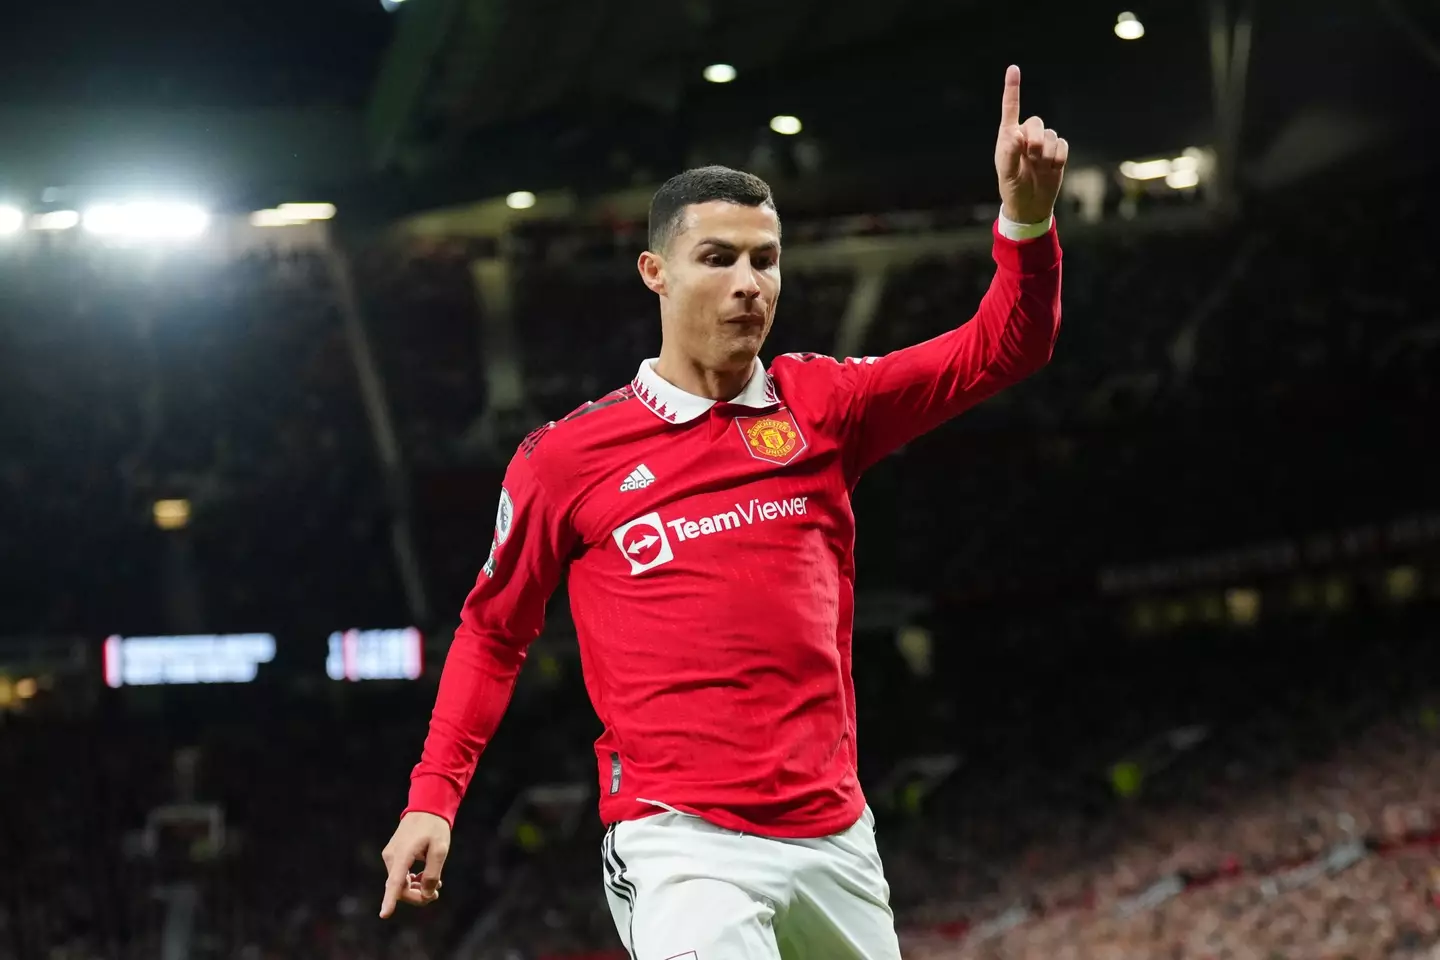 Ronaldo's second spell with Manchester United has come to an end. (Image